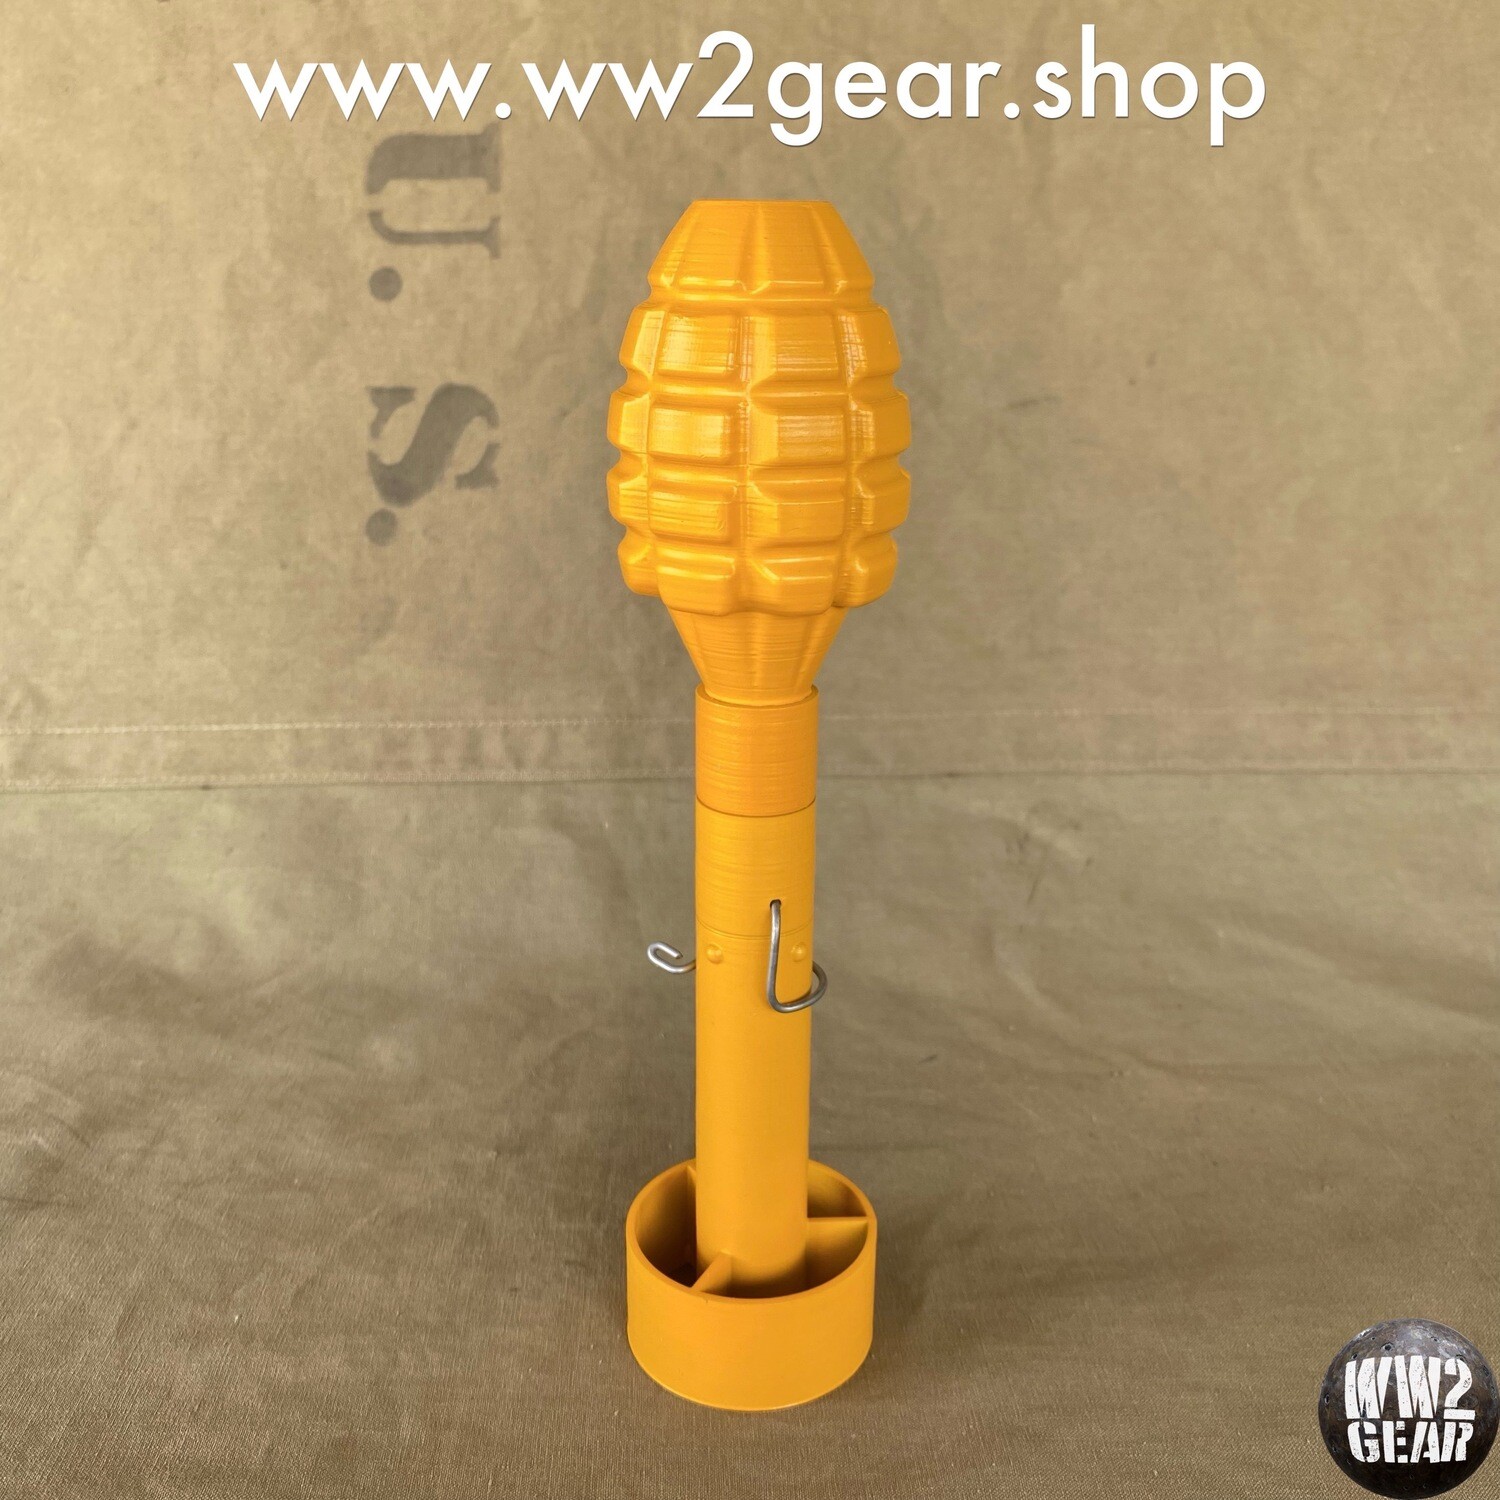 US WW2 M17 Rifle Grenade - Yellow (3D Printed Reproduction)